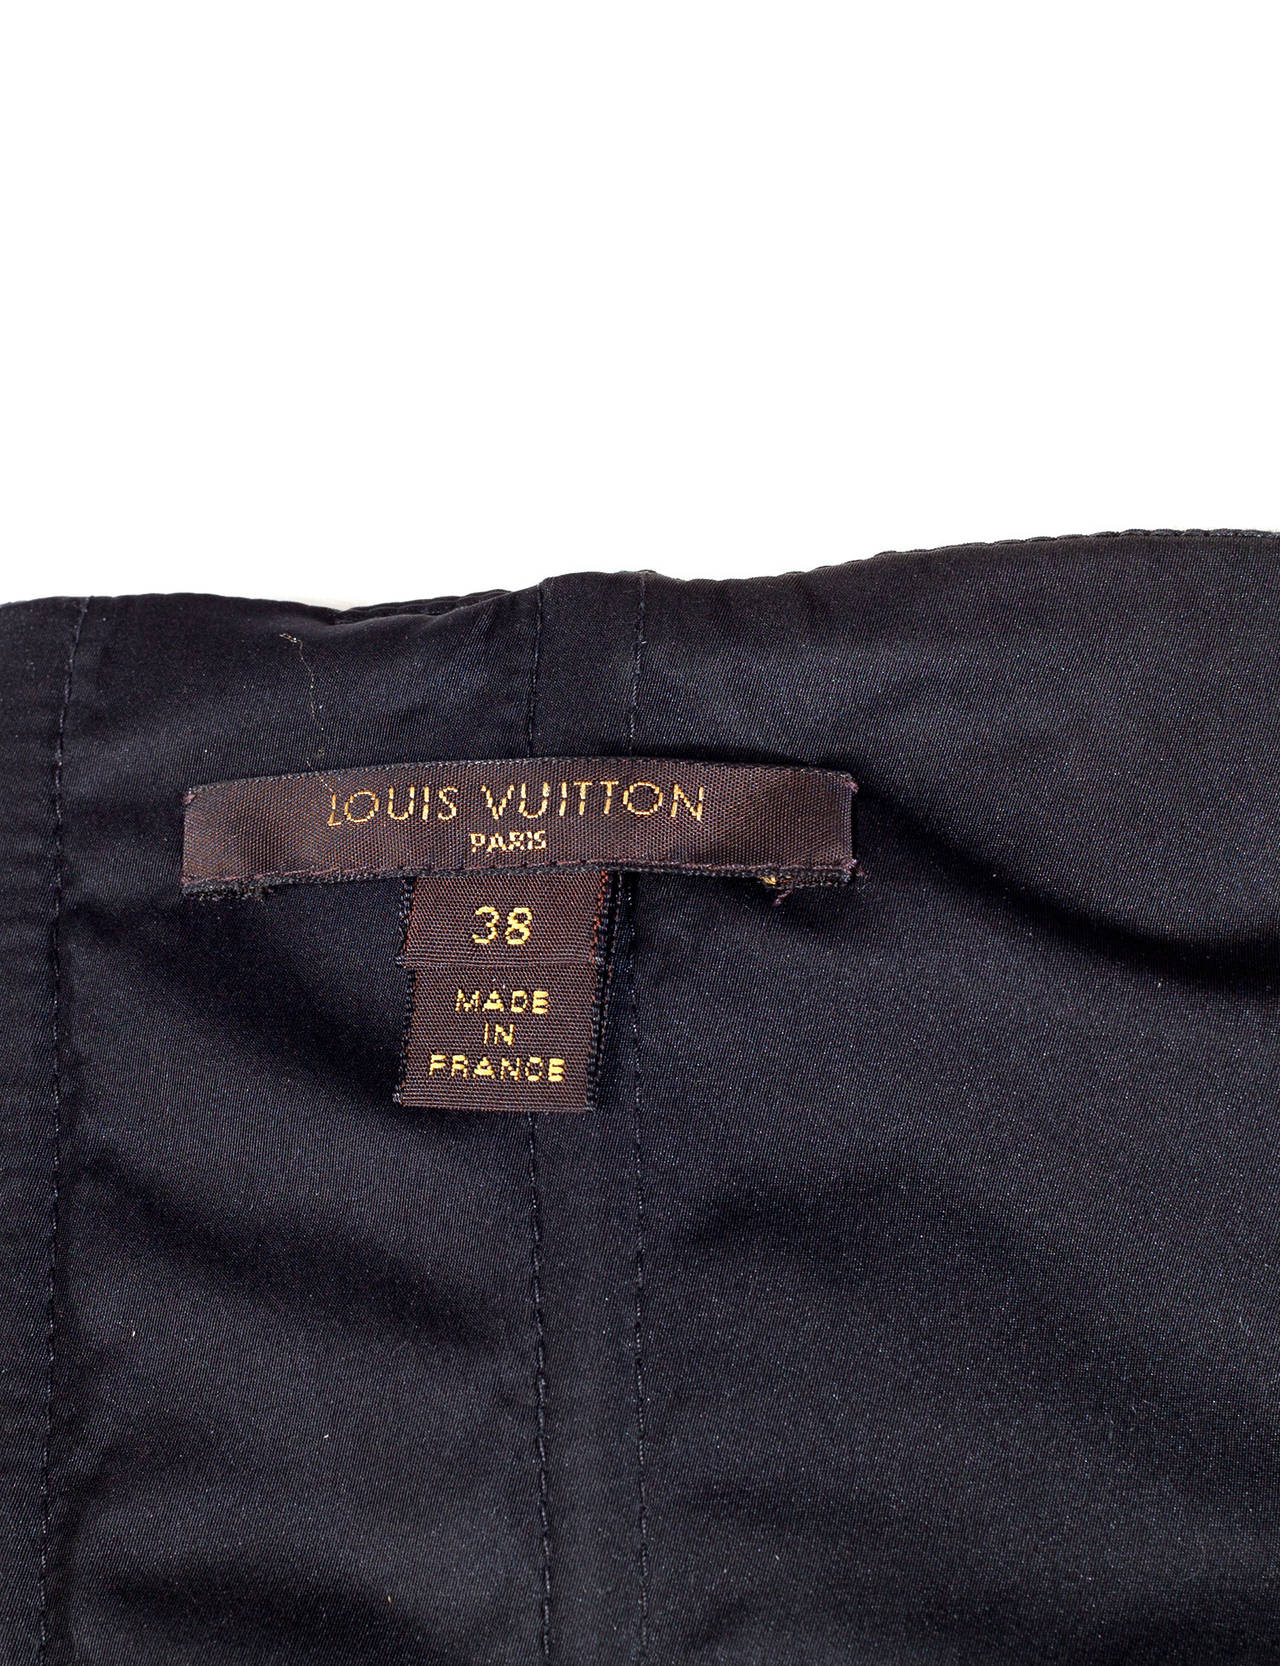 Louis Vuitton by Marc Jacobs Black Bustier dress, Sz. S at 1stDibs